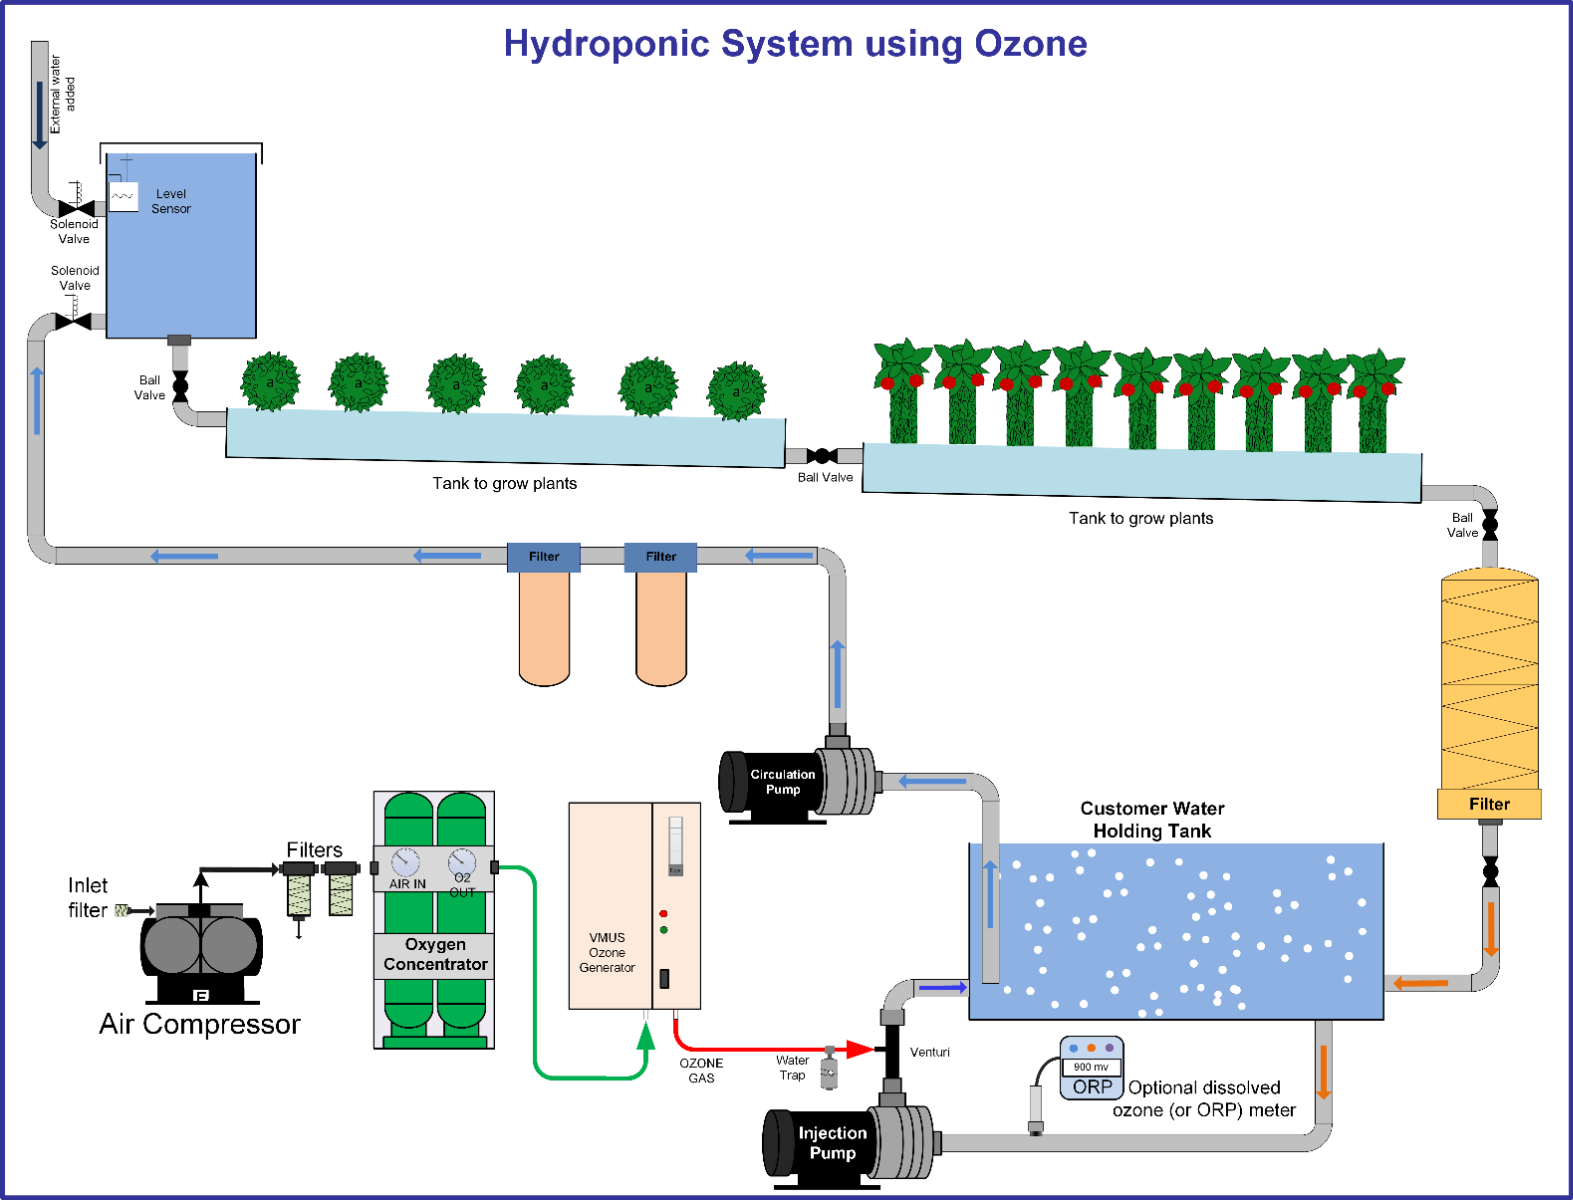 Ozone used in hydroponic greenhouse